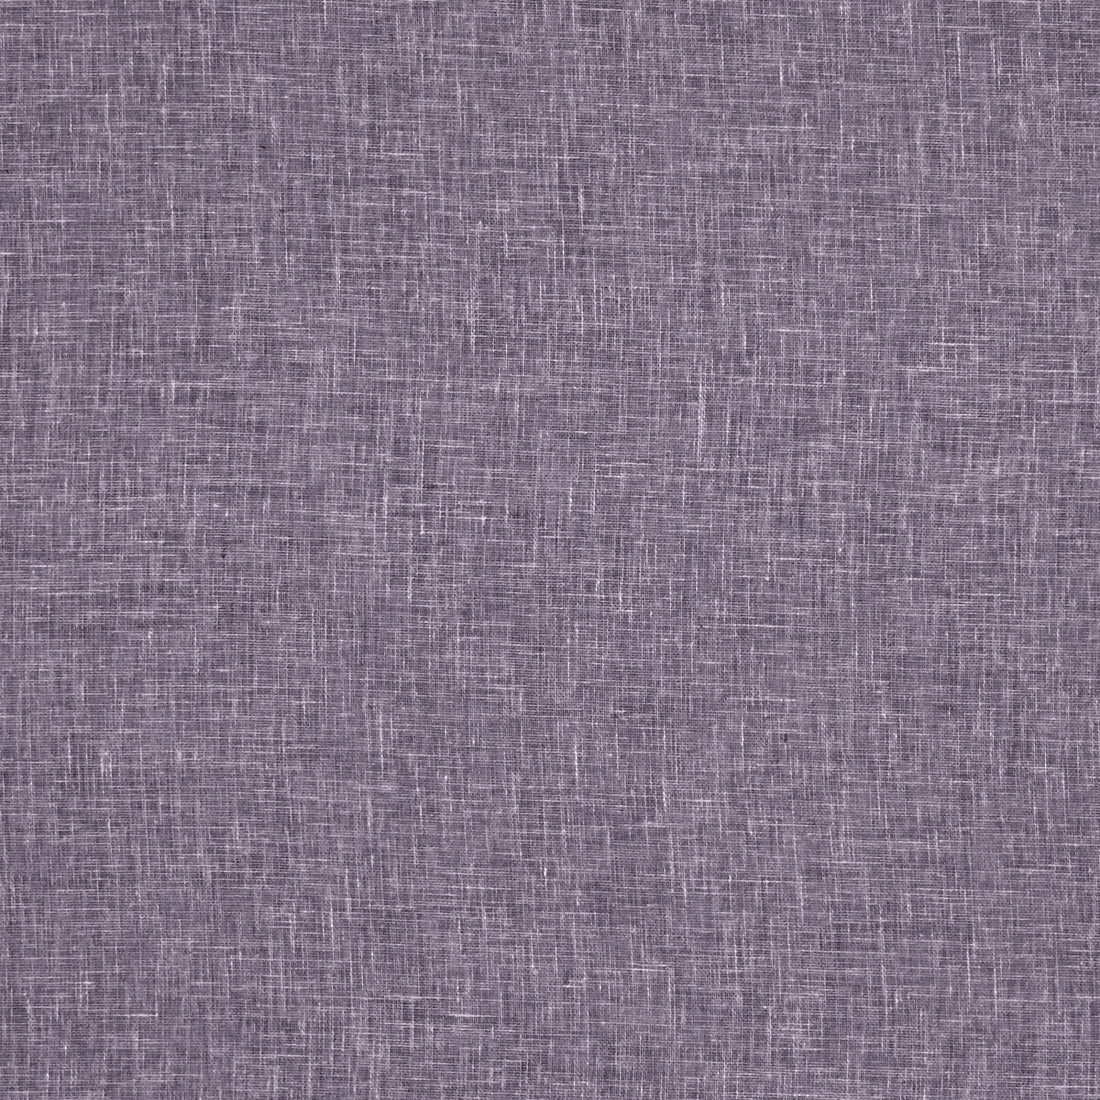 Midori fabric in damson color - pattern F1068/09.CAC.0 - by Clarke And Clarke in the Clarke &amp; Clarke Midori collection